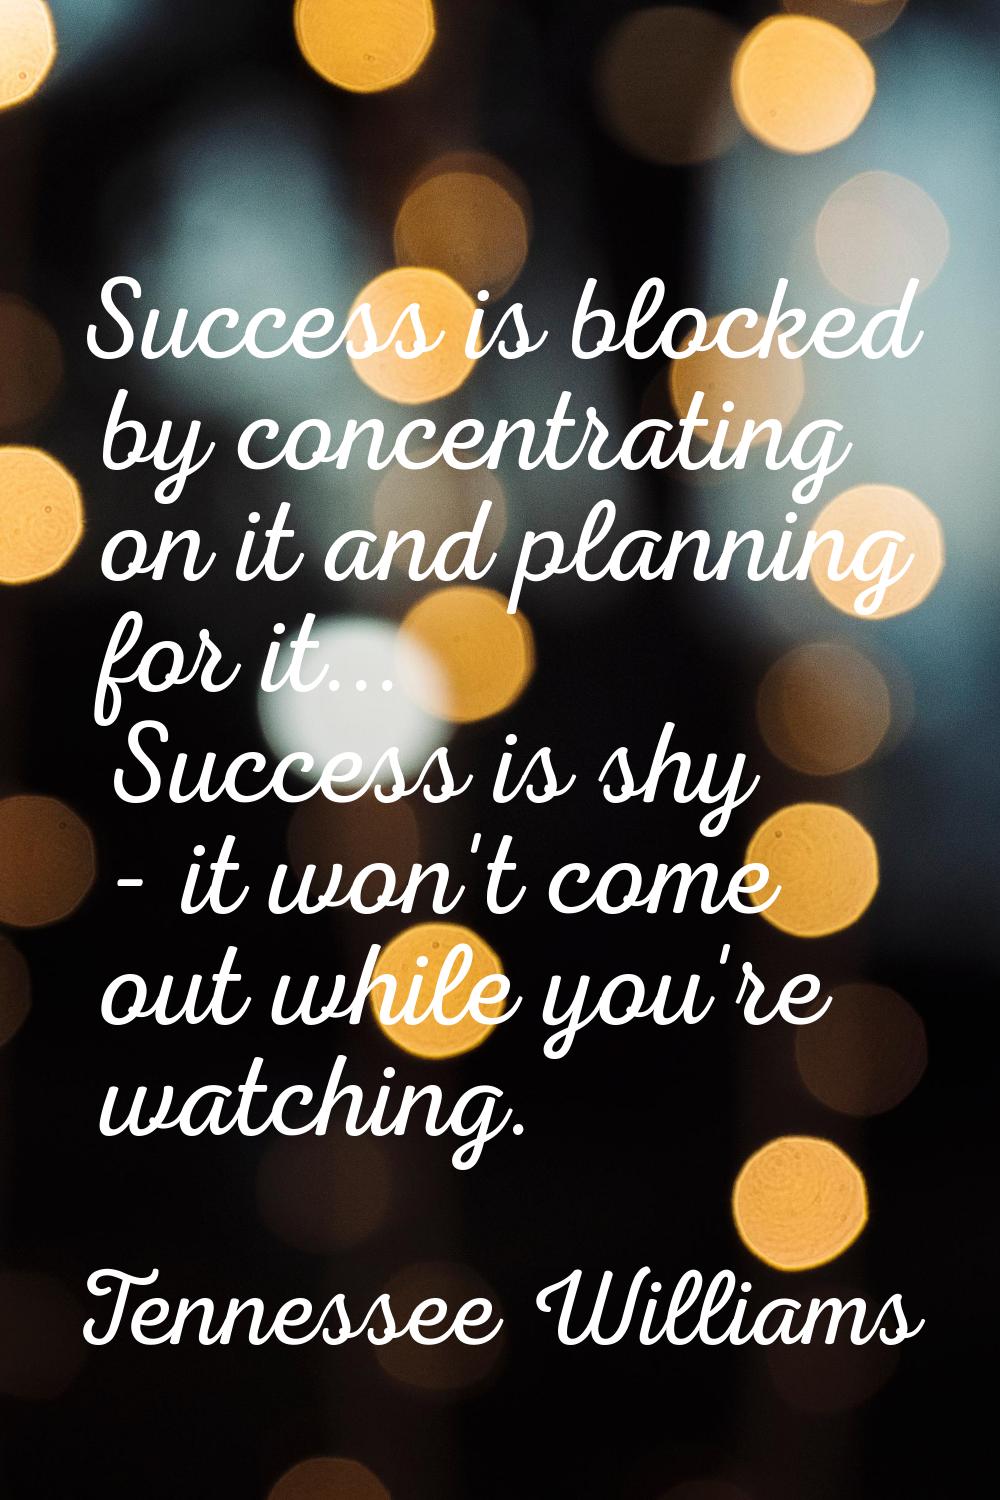 Success is blocked by concentrating on it and planning for it... Success is shy - it won't come out